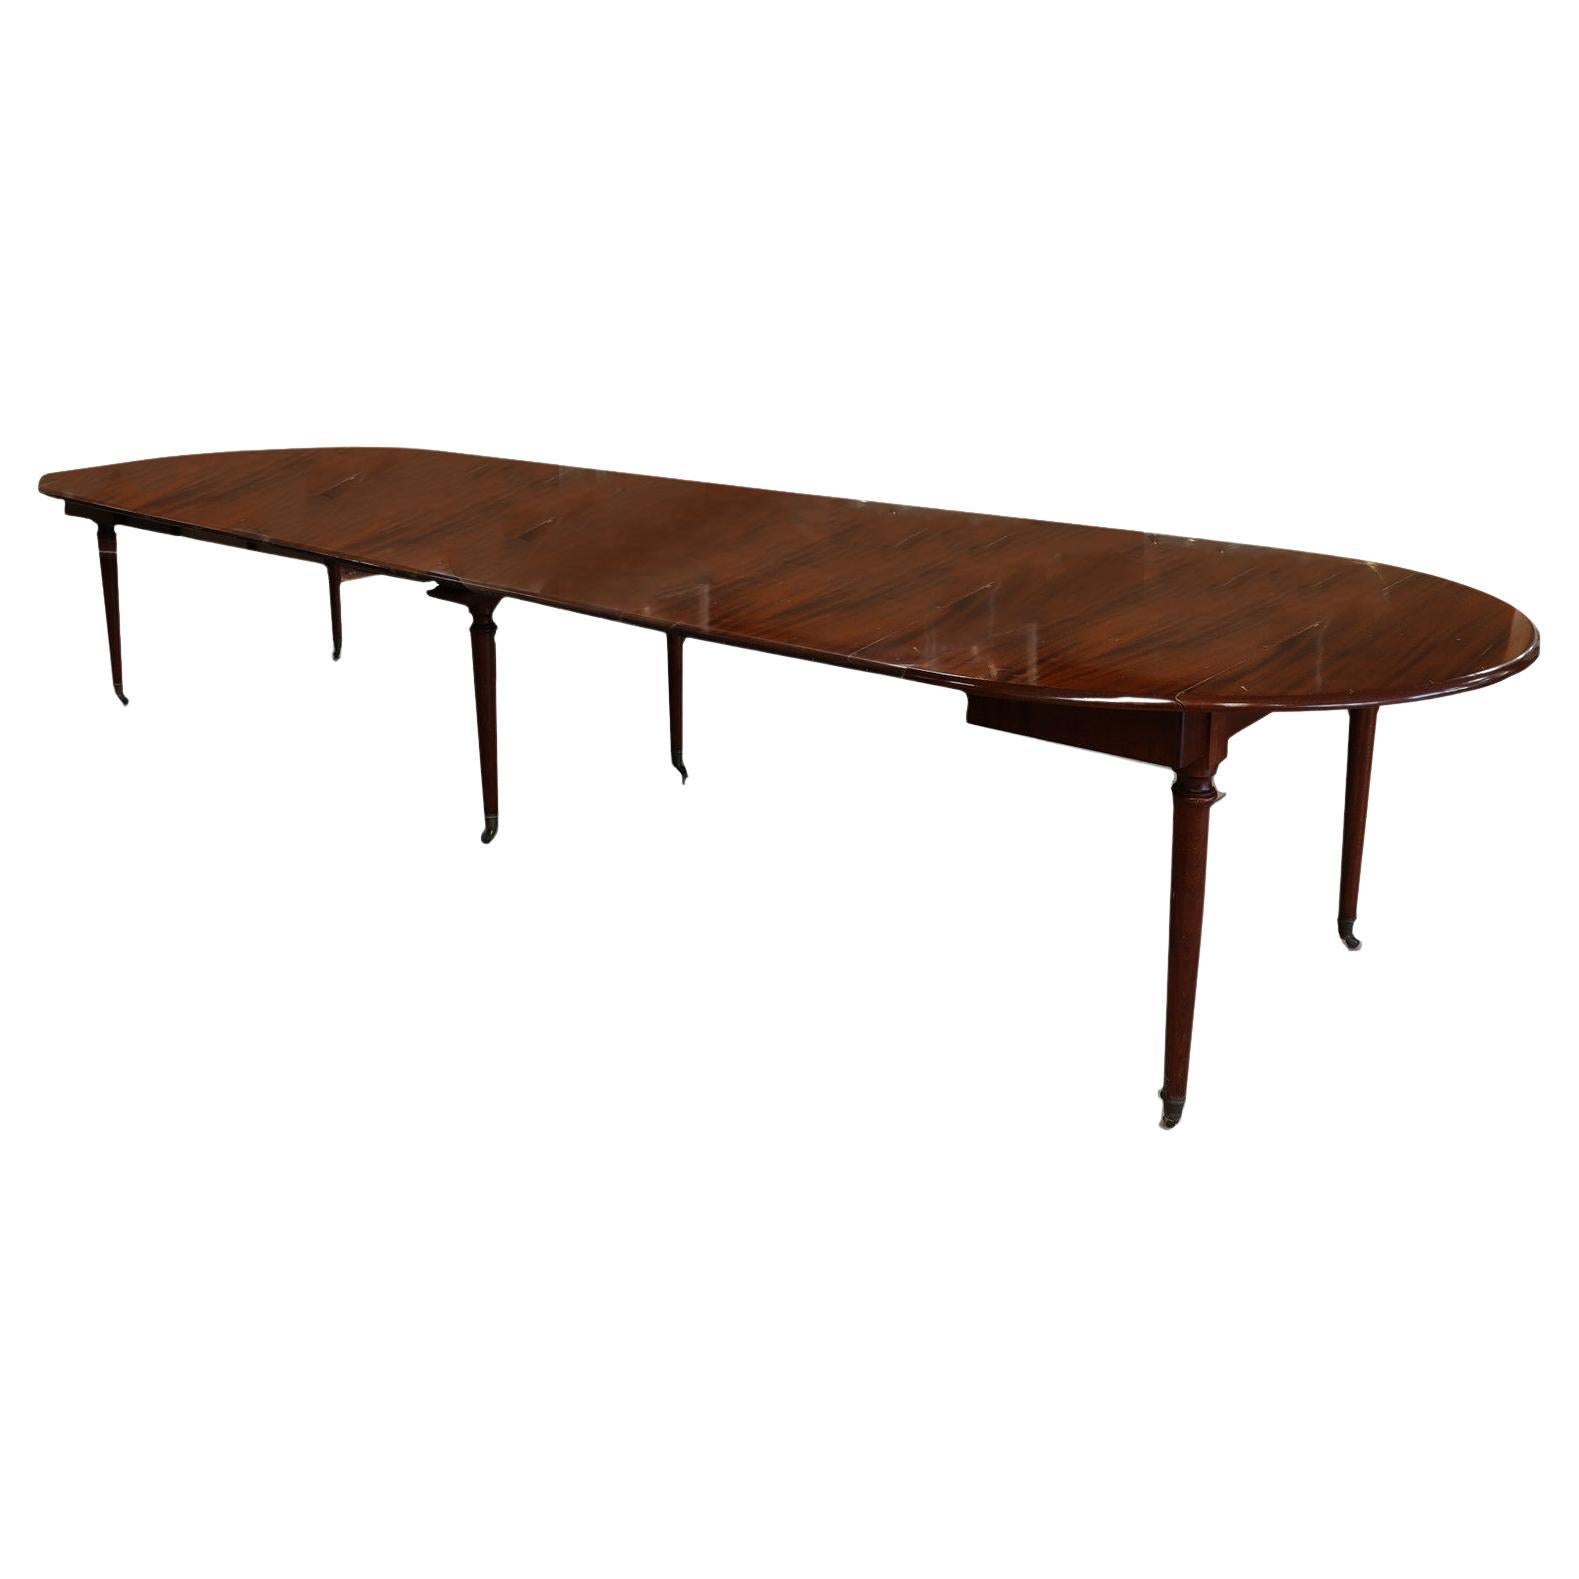 Early 19th Century English Style Mahogany Extending Dining Table